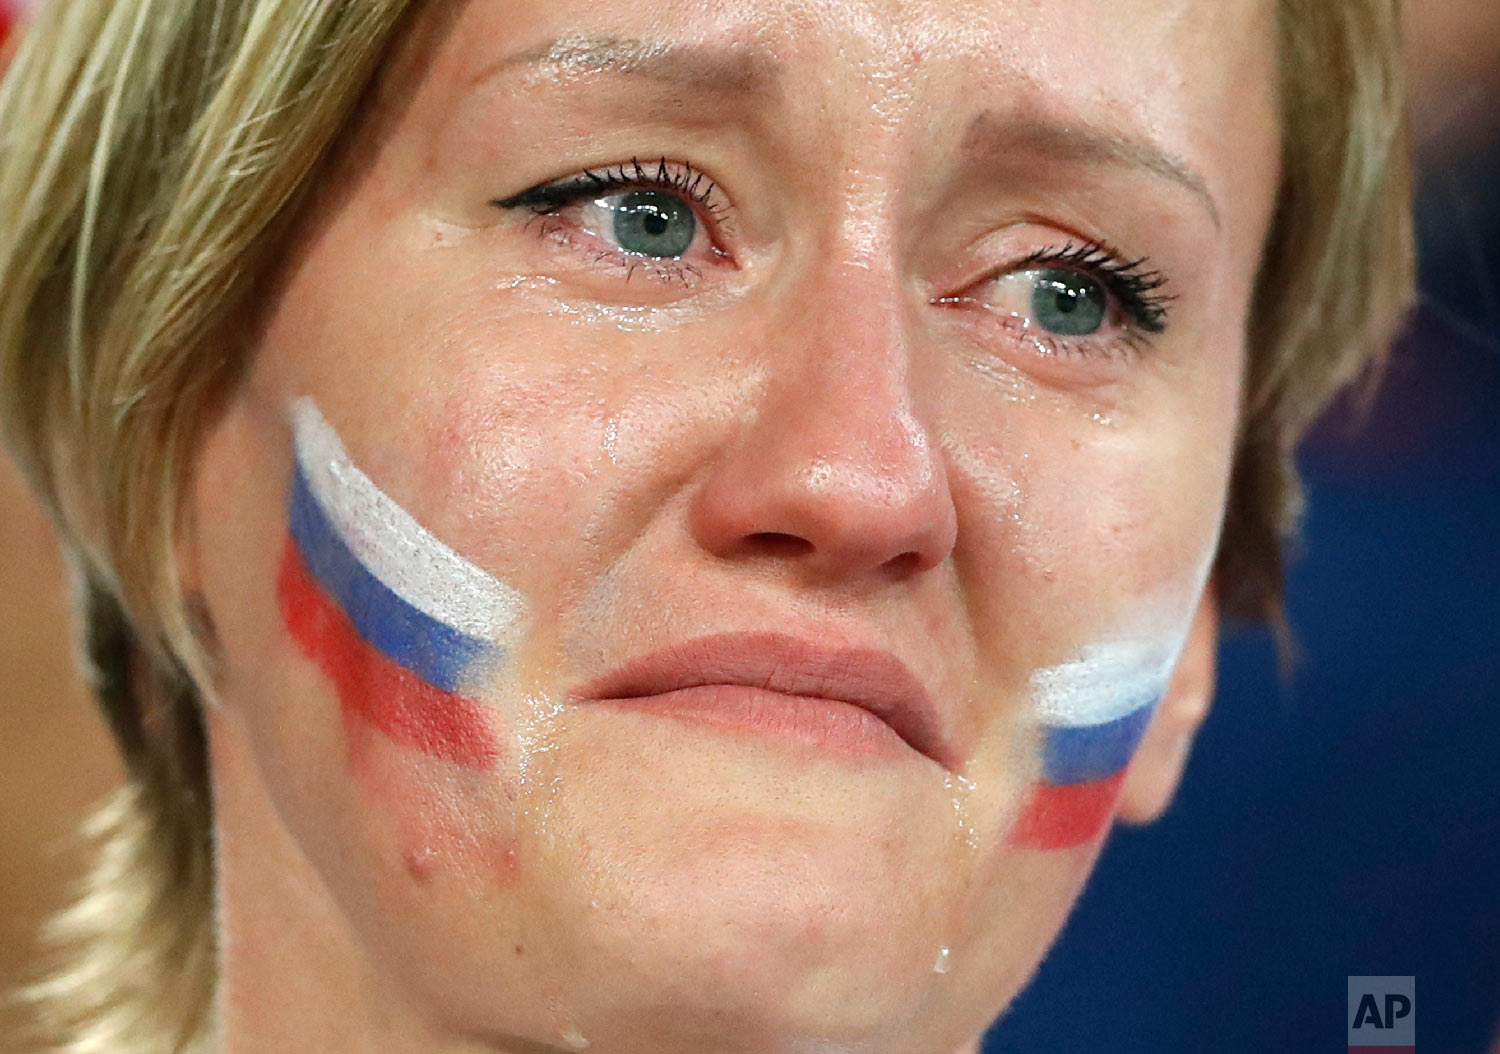  A Russia's fan cries after Russia's loss in the quarterfinal match between Russia and Croatia at the 2018 soccer World Cup in the Fisht Stadium, in Sochi, Russia, Saturday, July 7, 2018. (AP Photo/Darko Bandic) 